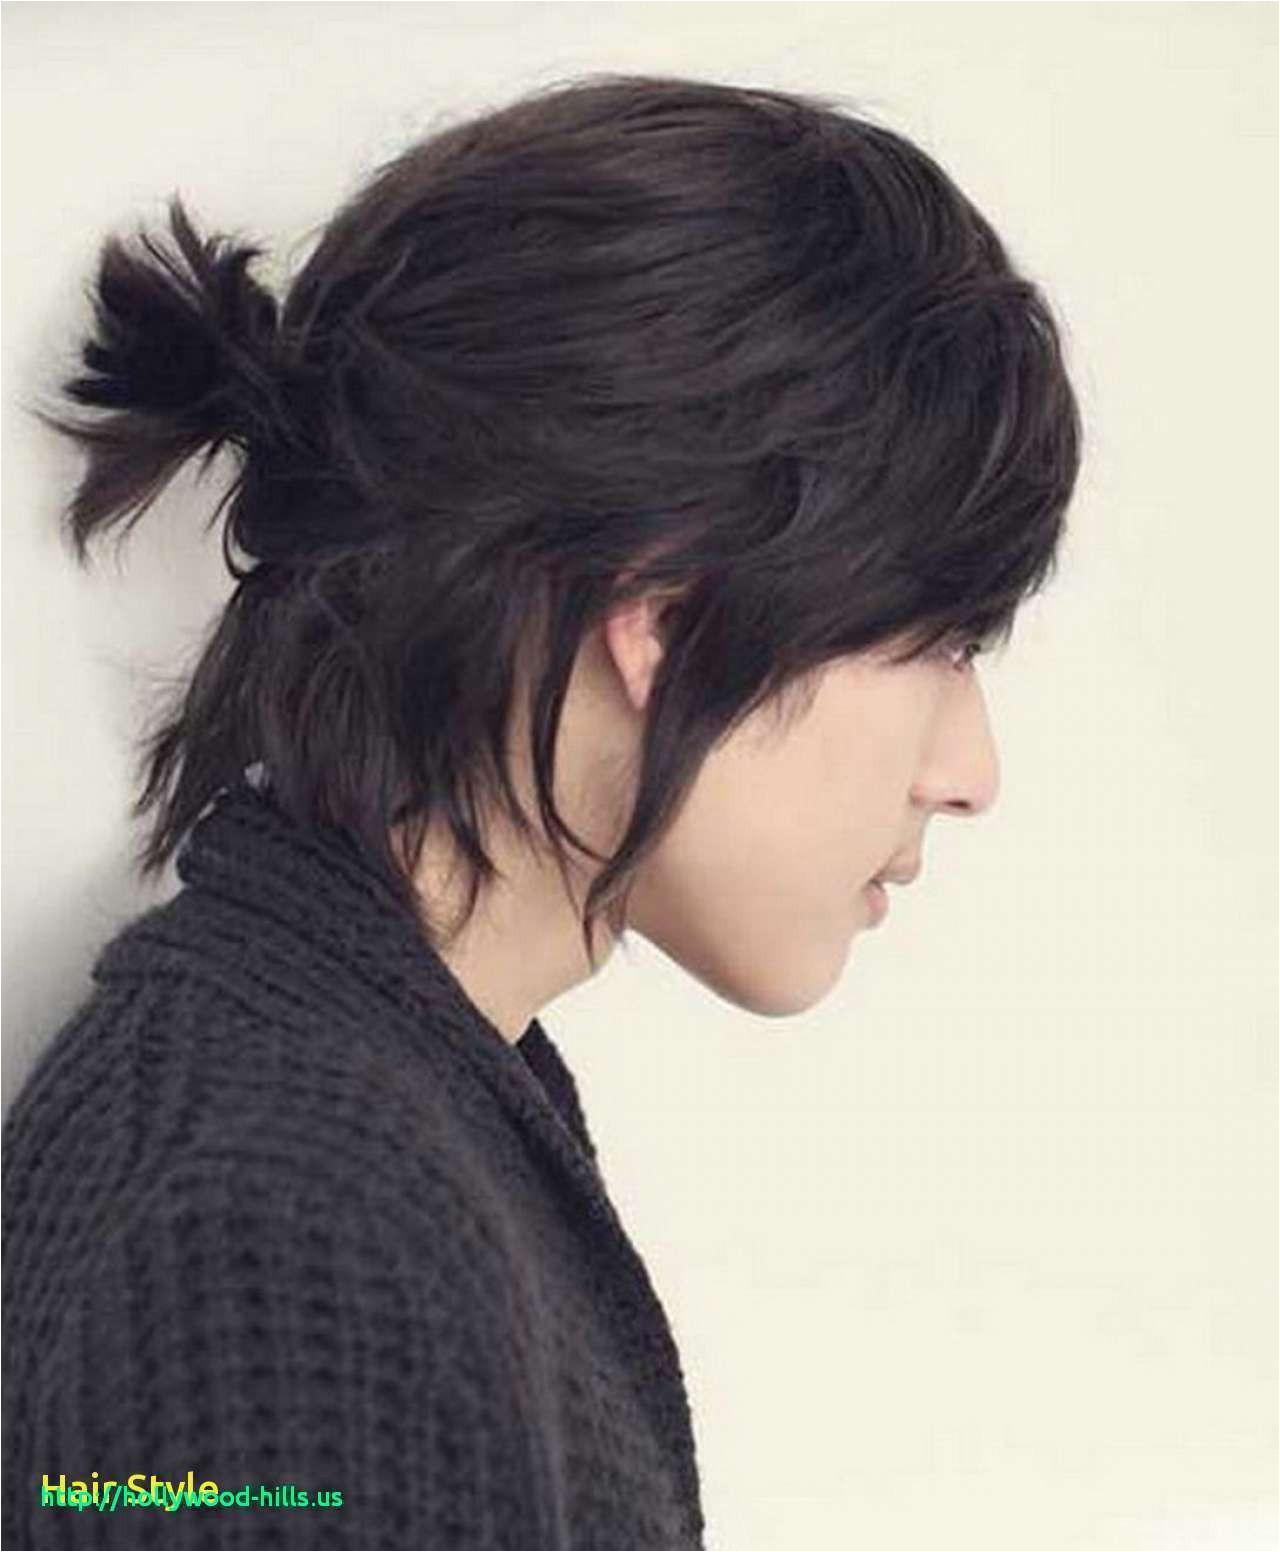 Cute Hairstyles 2012 Short Hairstyles asian Hair Lovely Captivating Short Hairstyles for